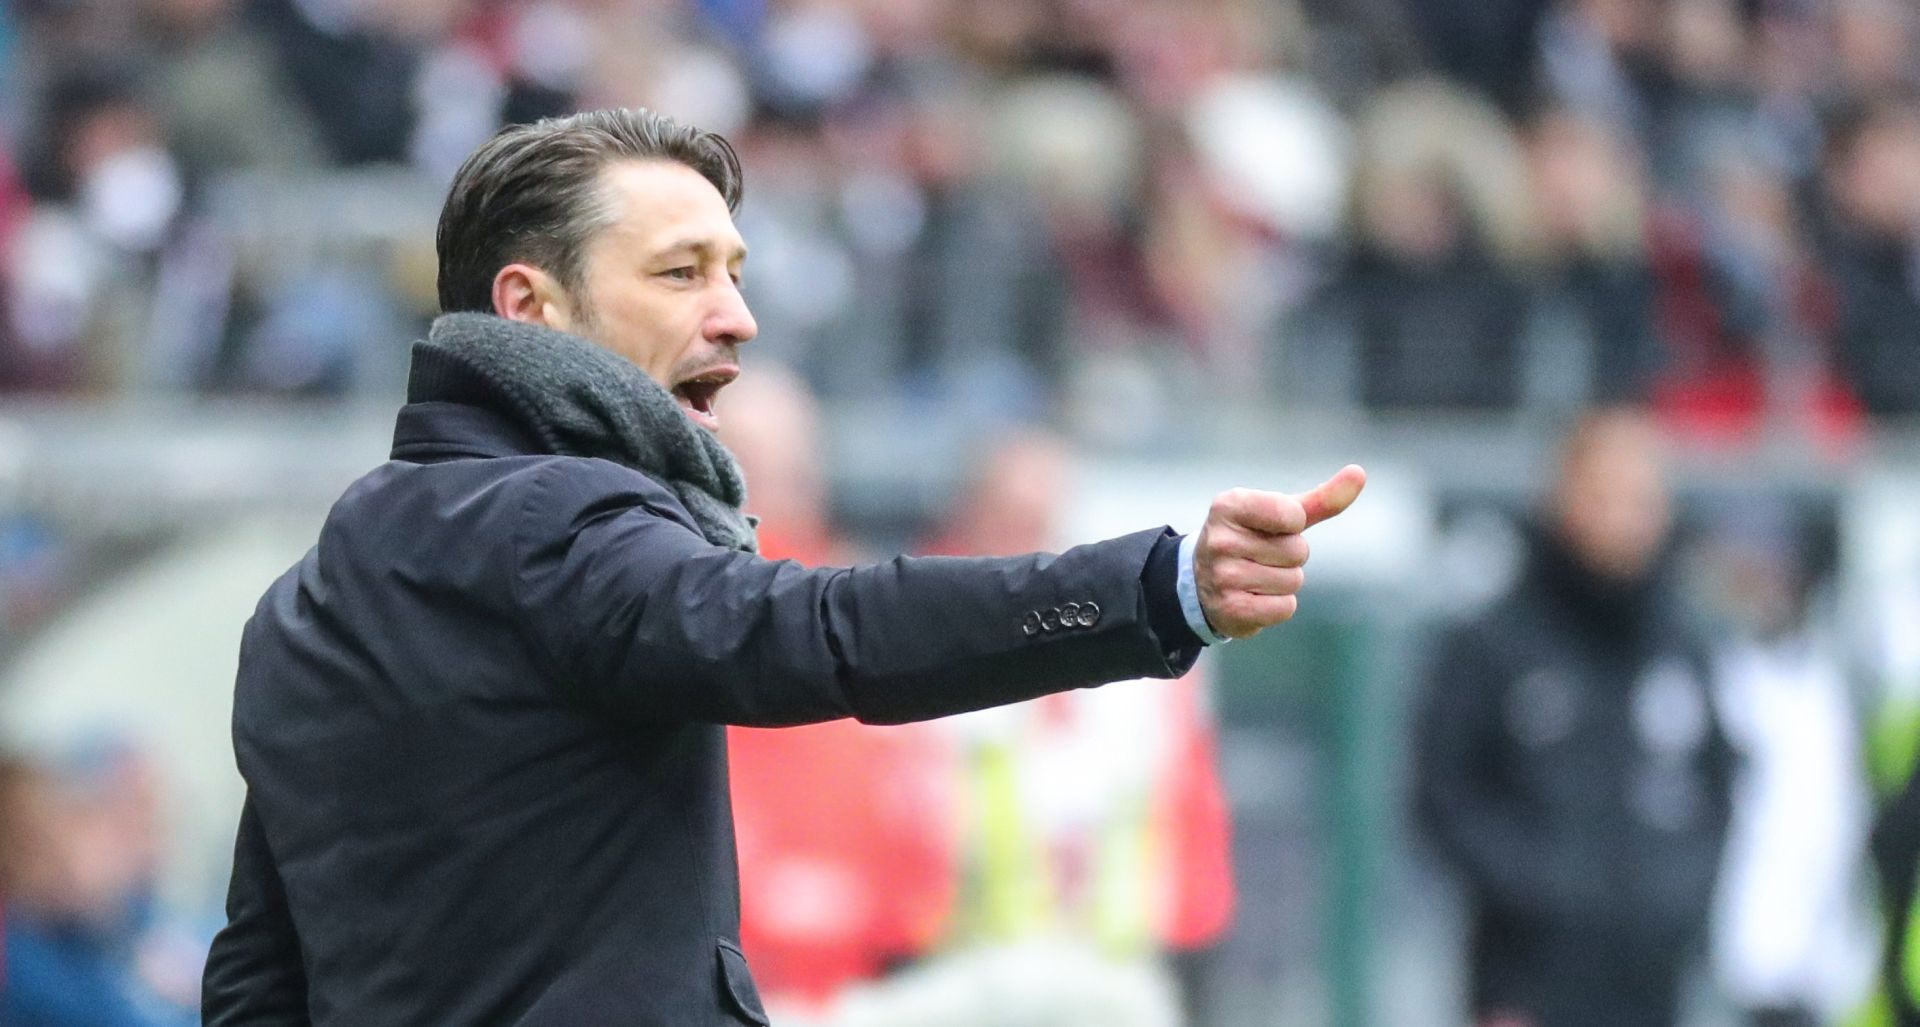 epa06610330 Frankfurt's head coach Niko Kovac reacts during the German Bundesliga soccer match between Eintracht Frankfurt and FSV Mainz 05 in Frankfurt Main, Germany, 17 March 2018.  EPA/ARMANDO BABANI EMBARGO CONDITIONS - ATTENTION: Due to the accreditation guidelines, the DFL only permits the publication and utilisation of up to 15 pictures per match on the internet and in online media during the match.